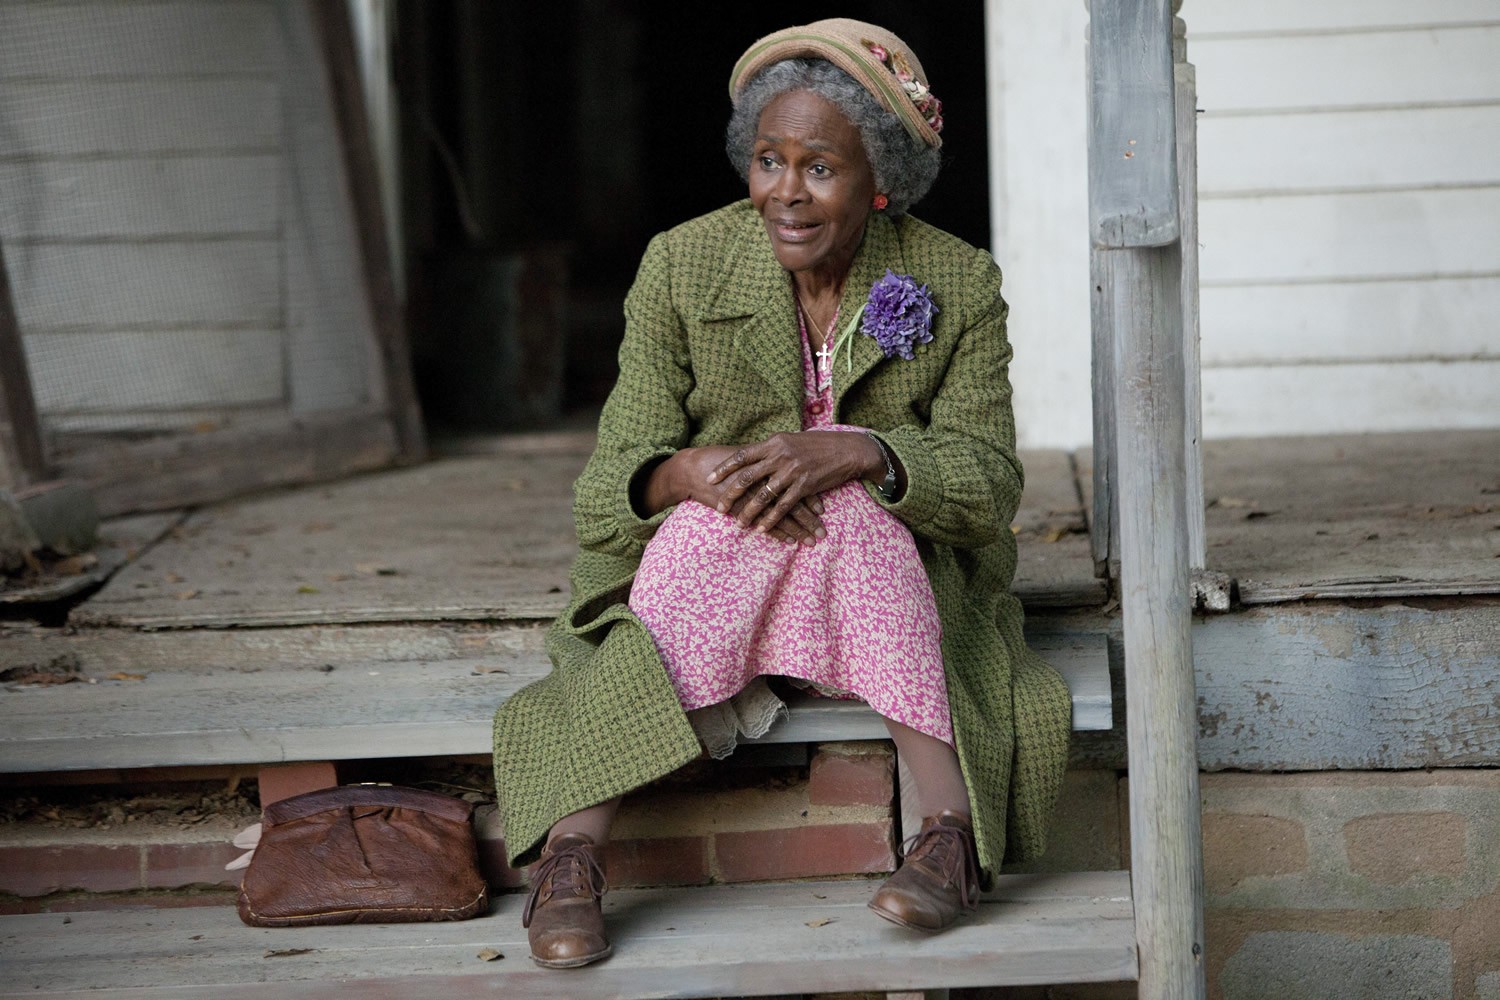 Cicely Tyson stars as Mrs. Watts in Lifetime's The Trip to Bountiful (2014). Photo credit by Annette Brown.